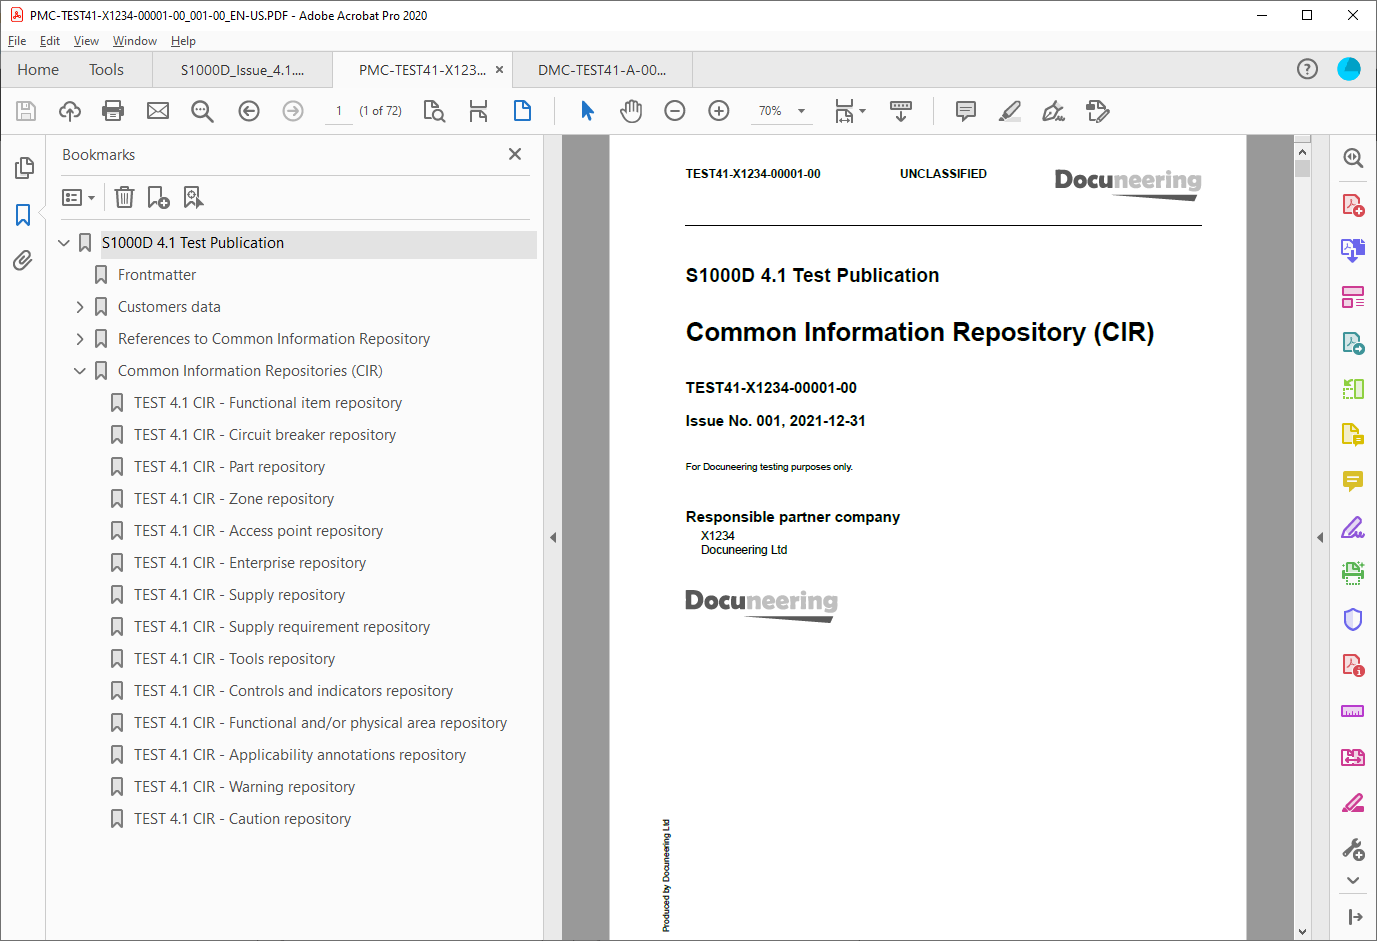 Docuneering - S1000D 4.1 Test Publication - Common Information Repository